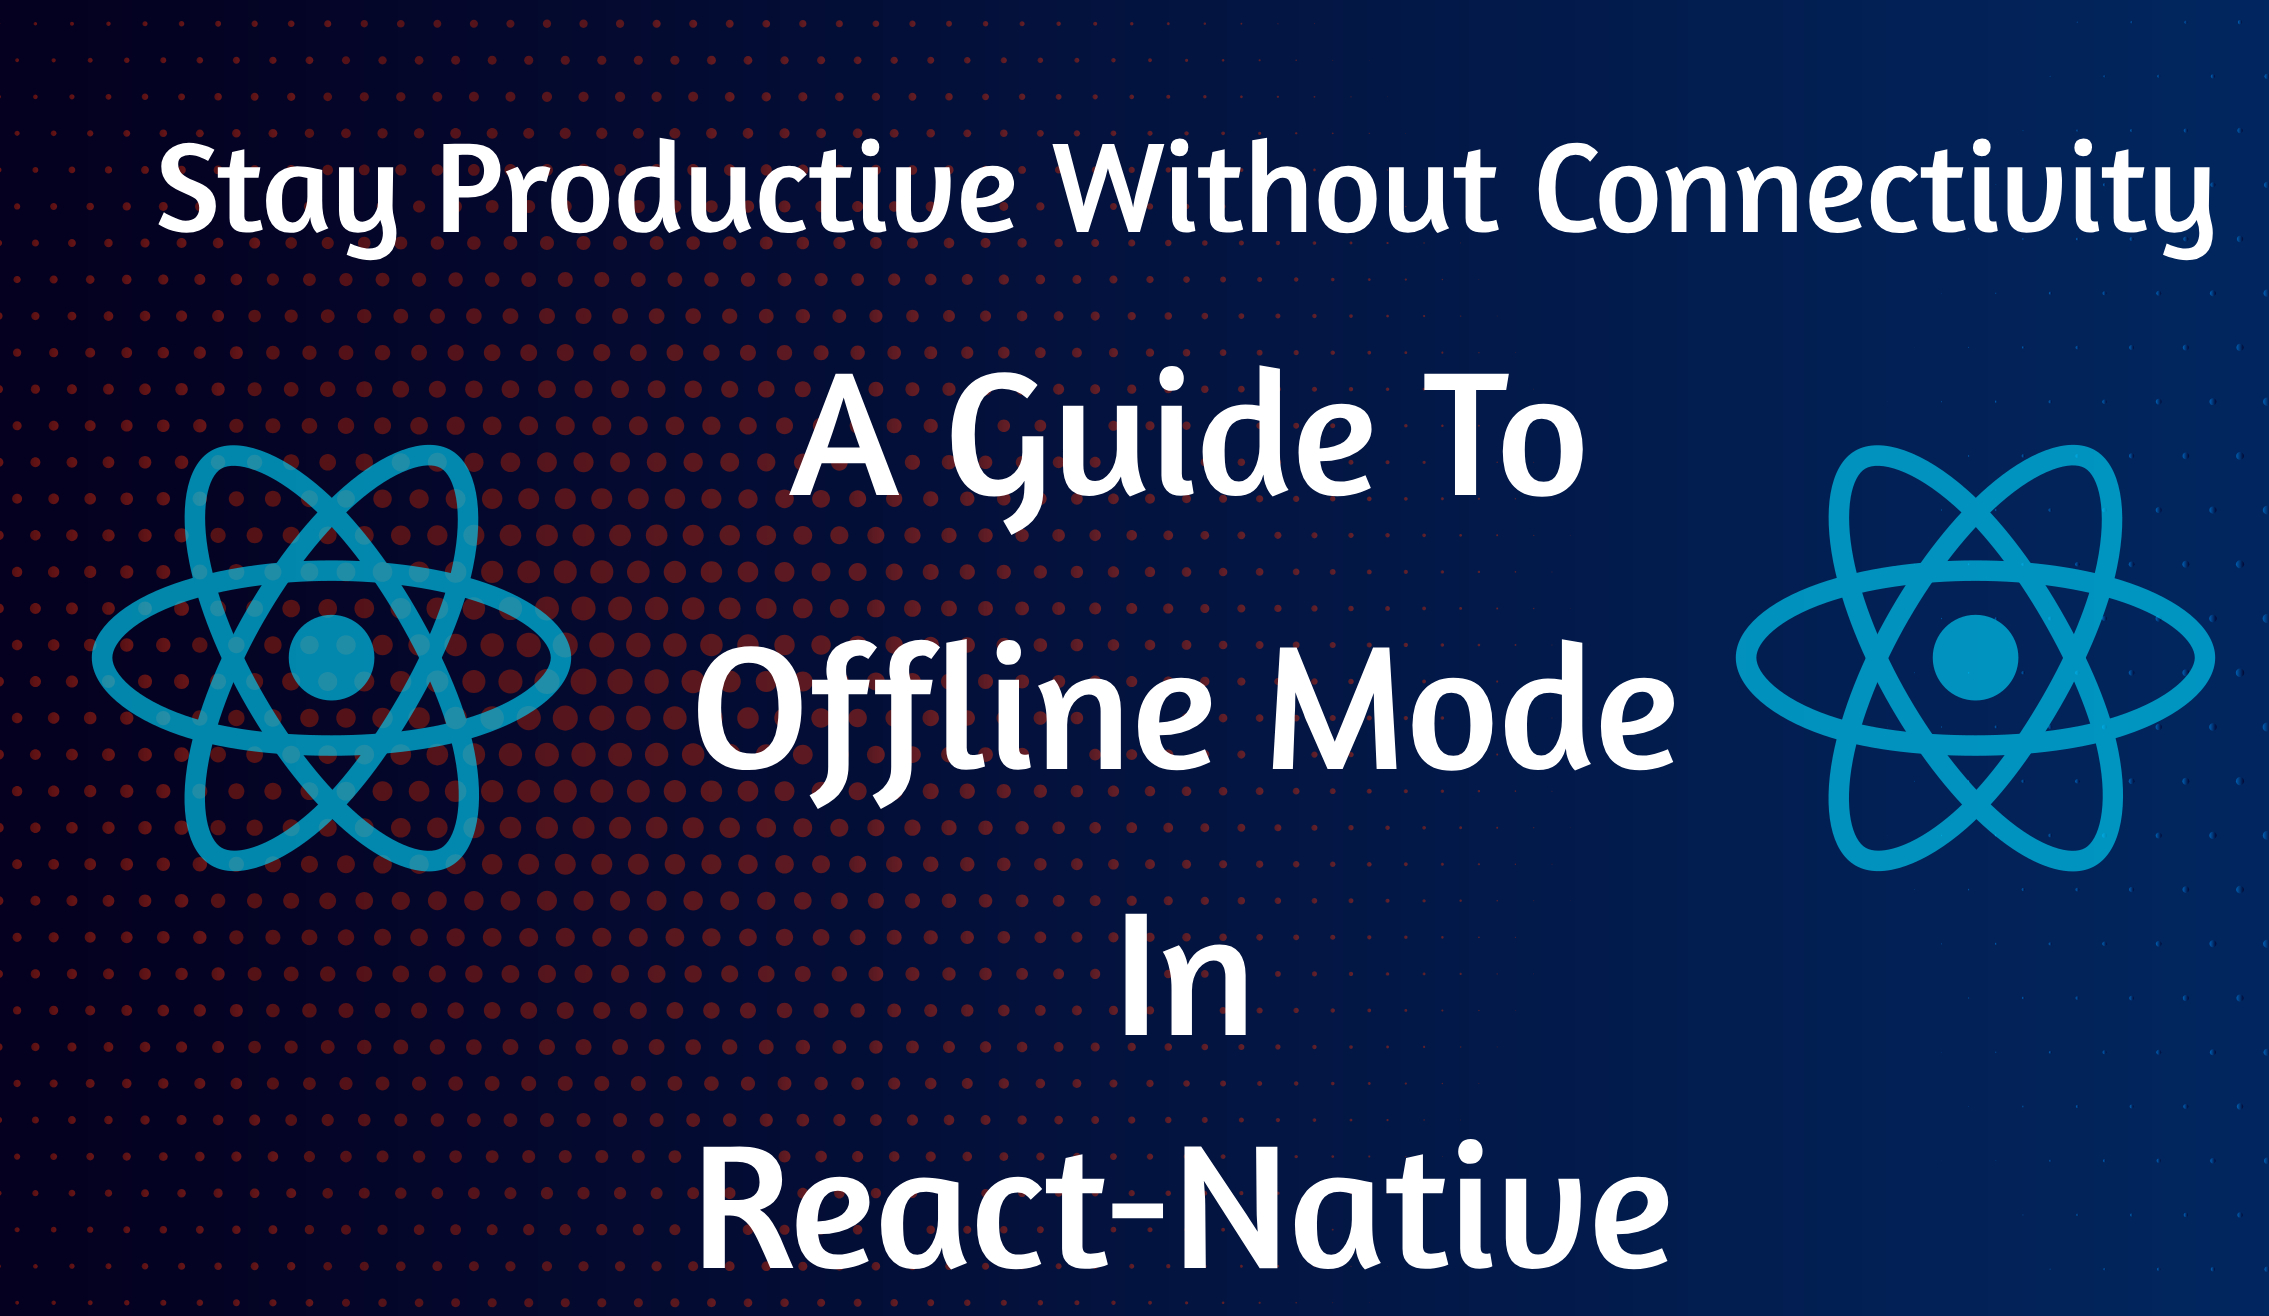 Stay Productive Without Connectivity - A Guide to Offline Mode in React-Native. The image features the React logo on both sides with a gradient blue background and dotted pattern